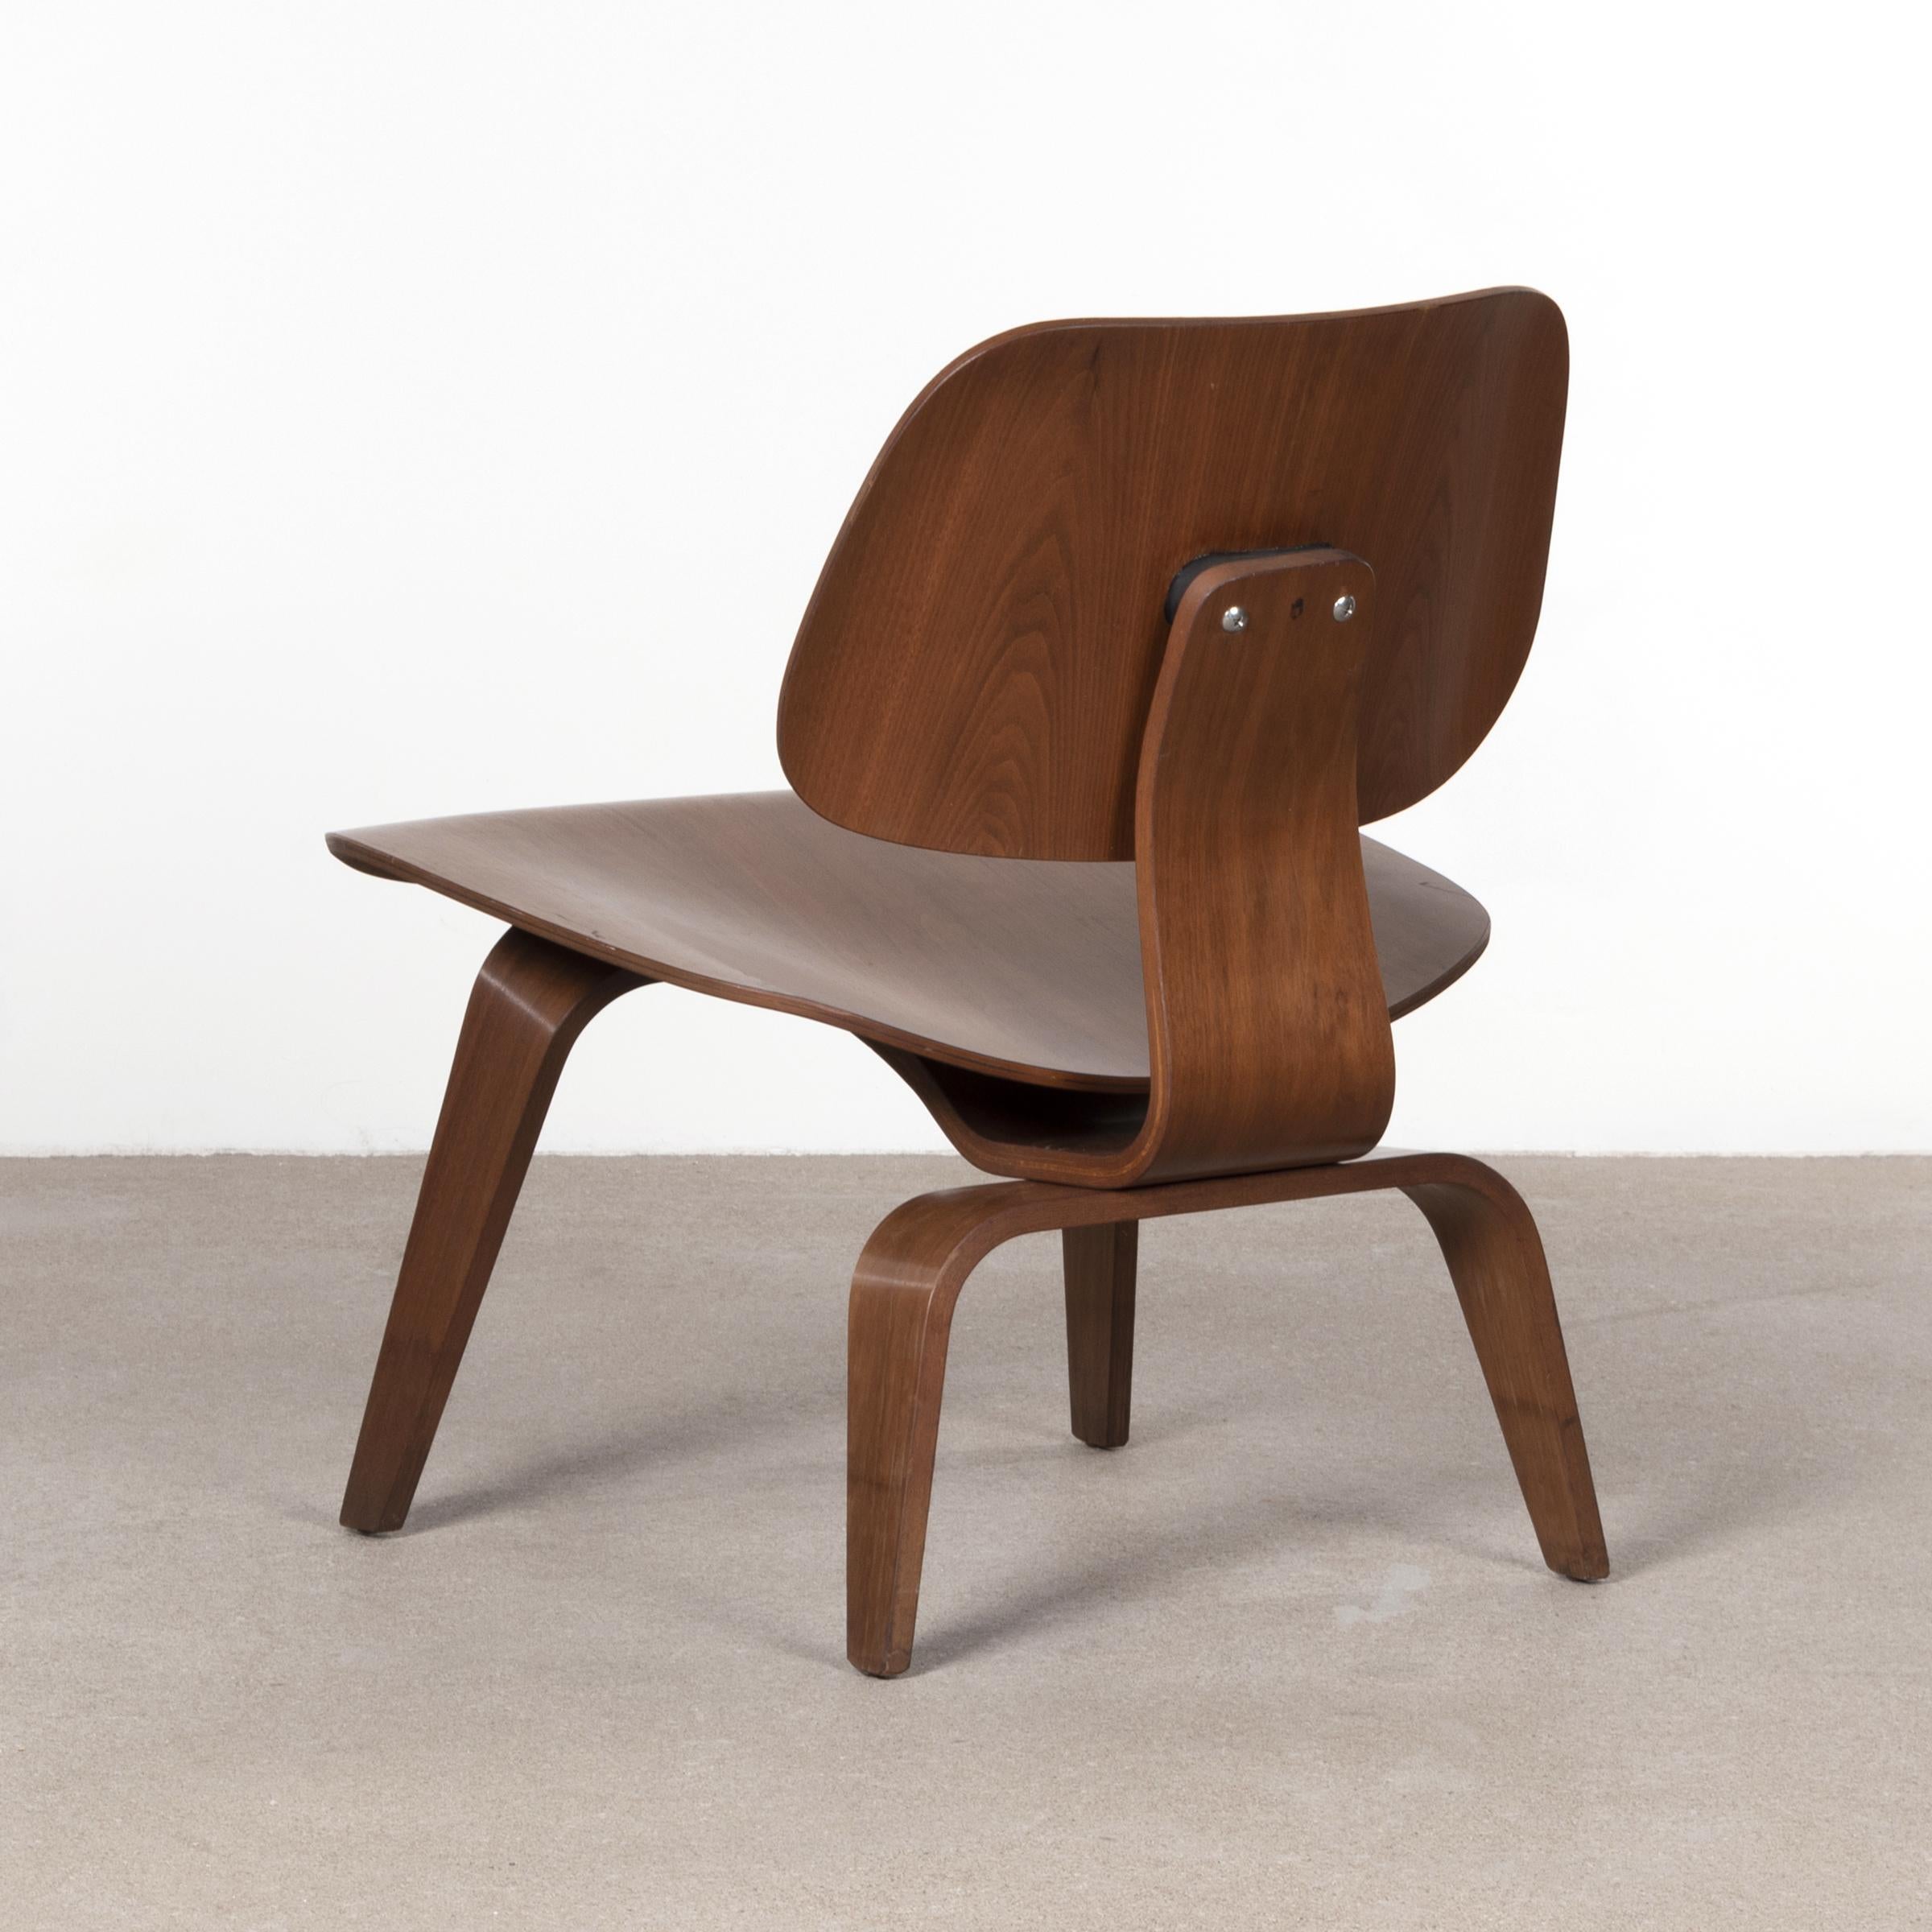 Mid-20th Century Eames Early LCW Walnut Lounge Chair for Herman Miller